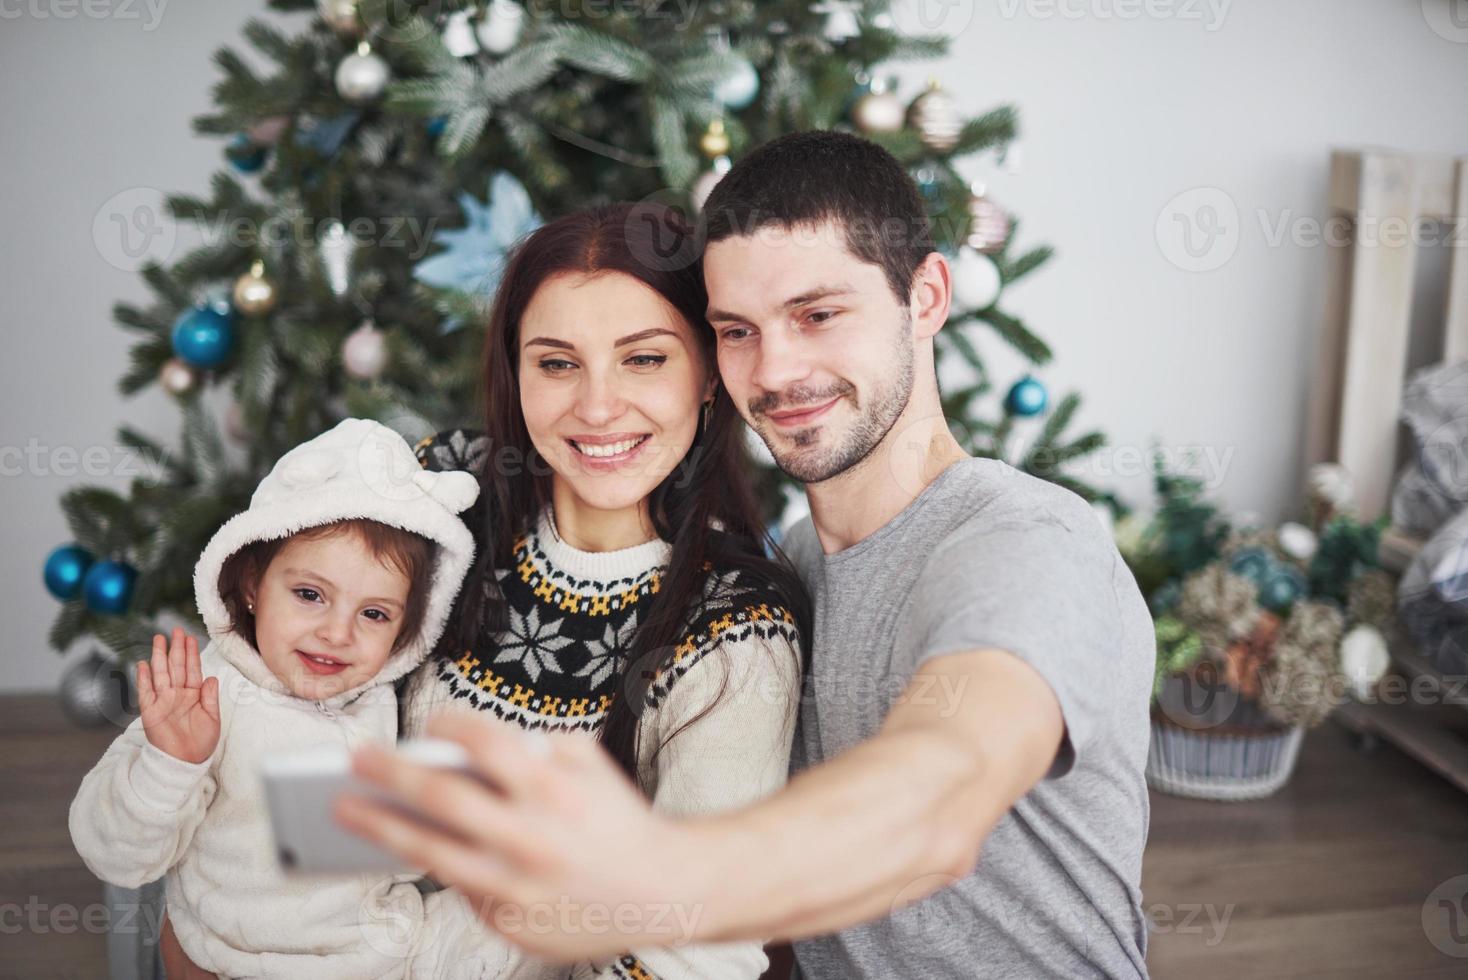 Family gathered around a Christmas tree, using a tablet photo